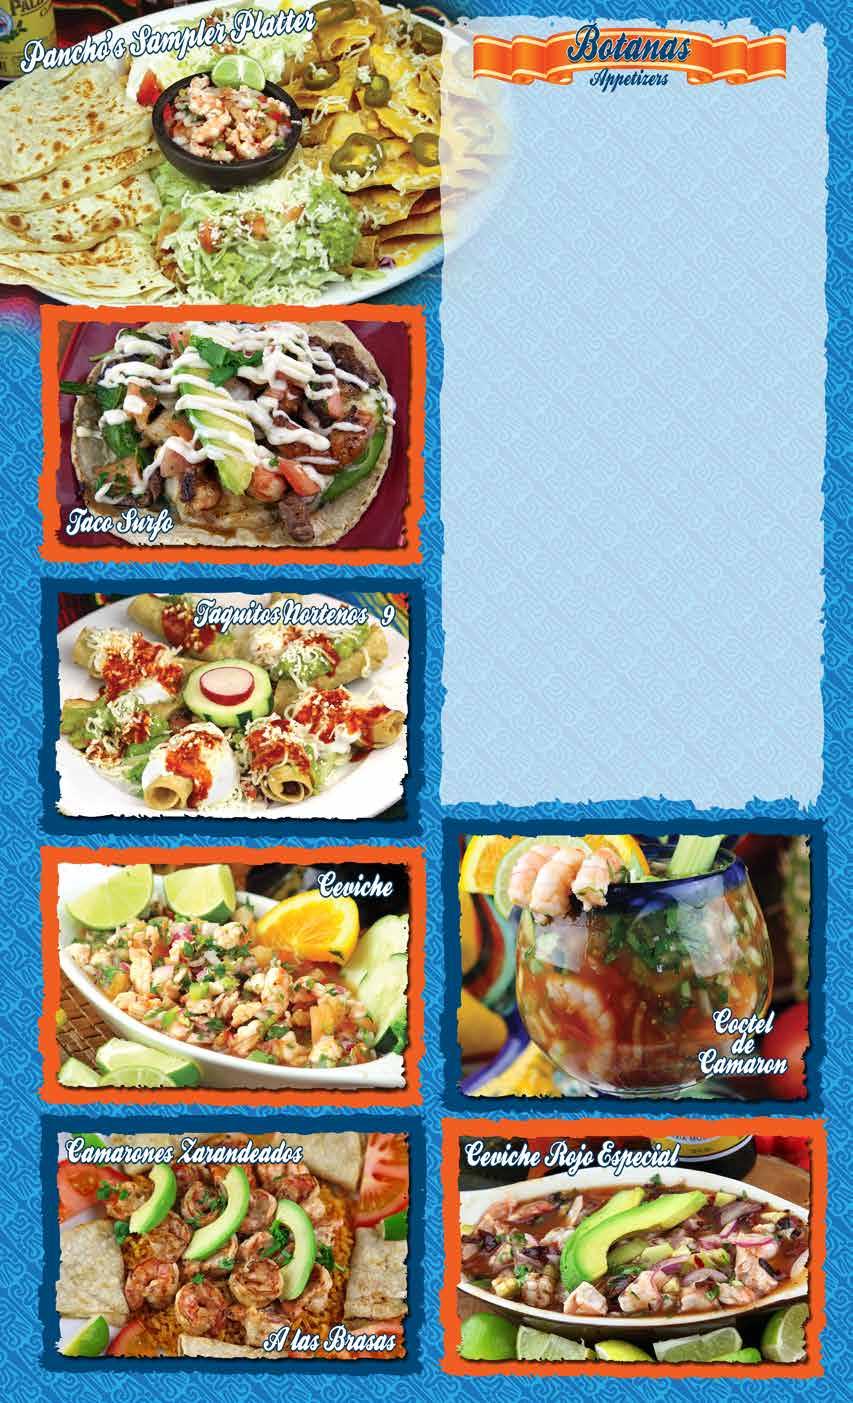 Panchos Sampler Platter... 20 A tasty combination of our most popular items meant for sharing!